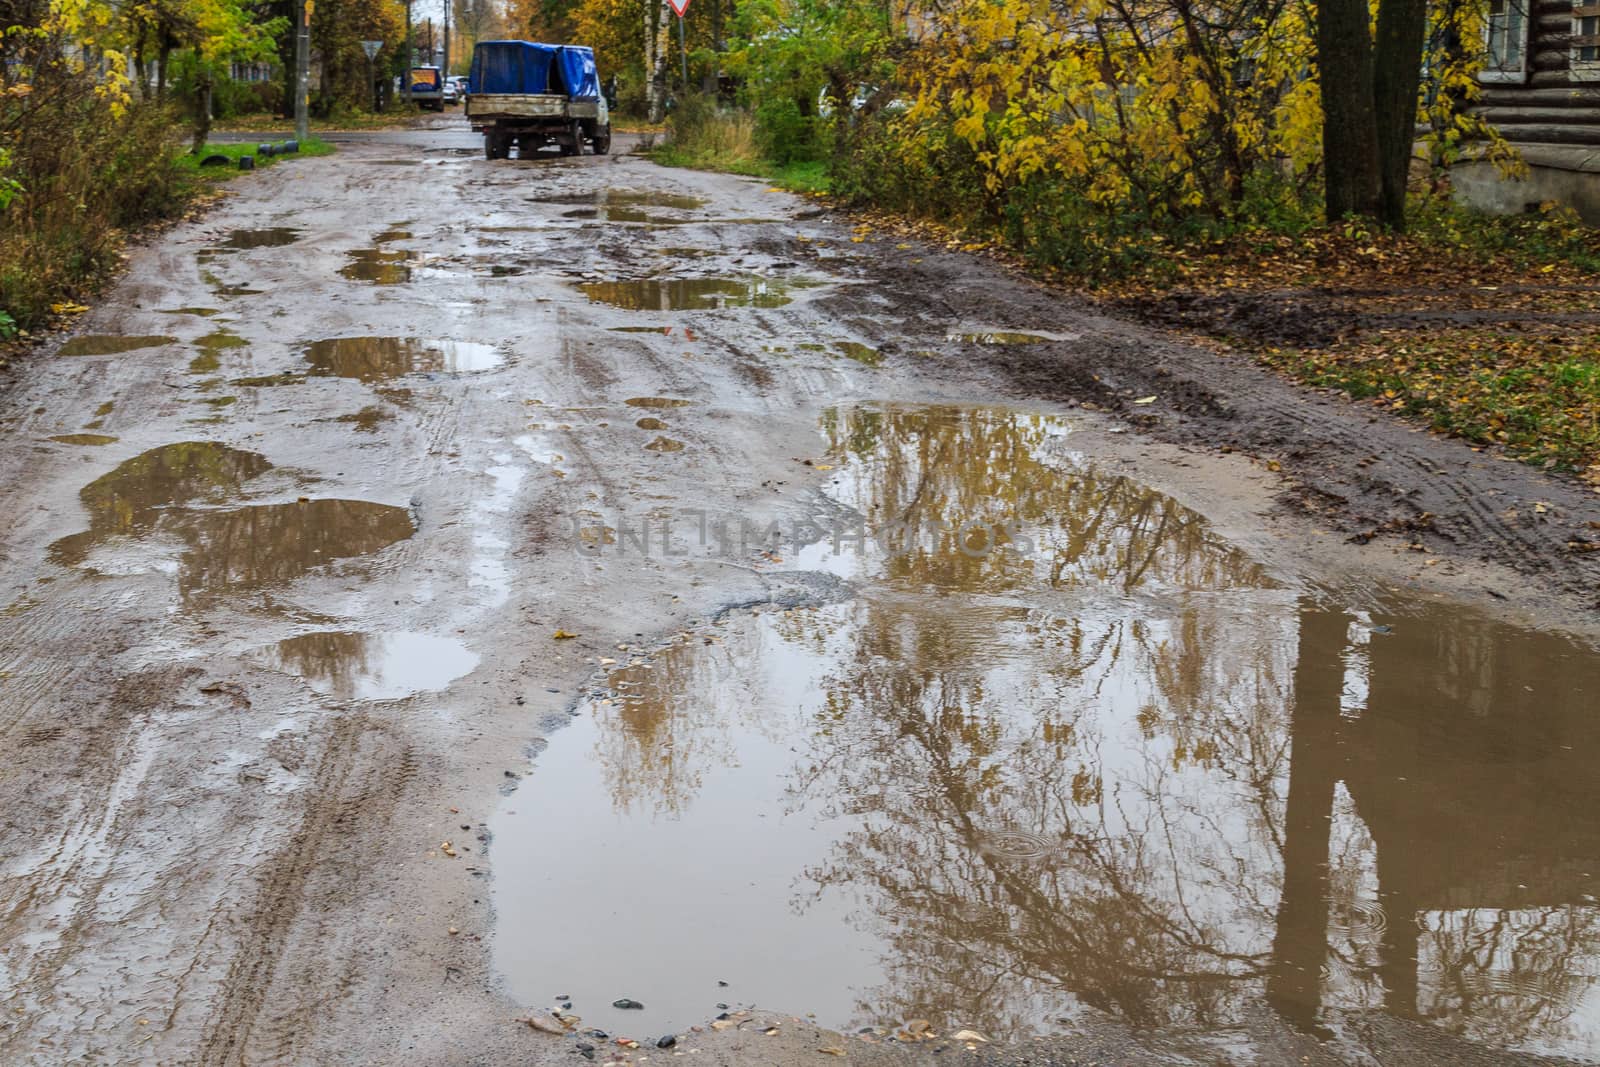 roadway in a provincial Russian city in poor condition, pits and dirt